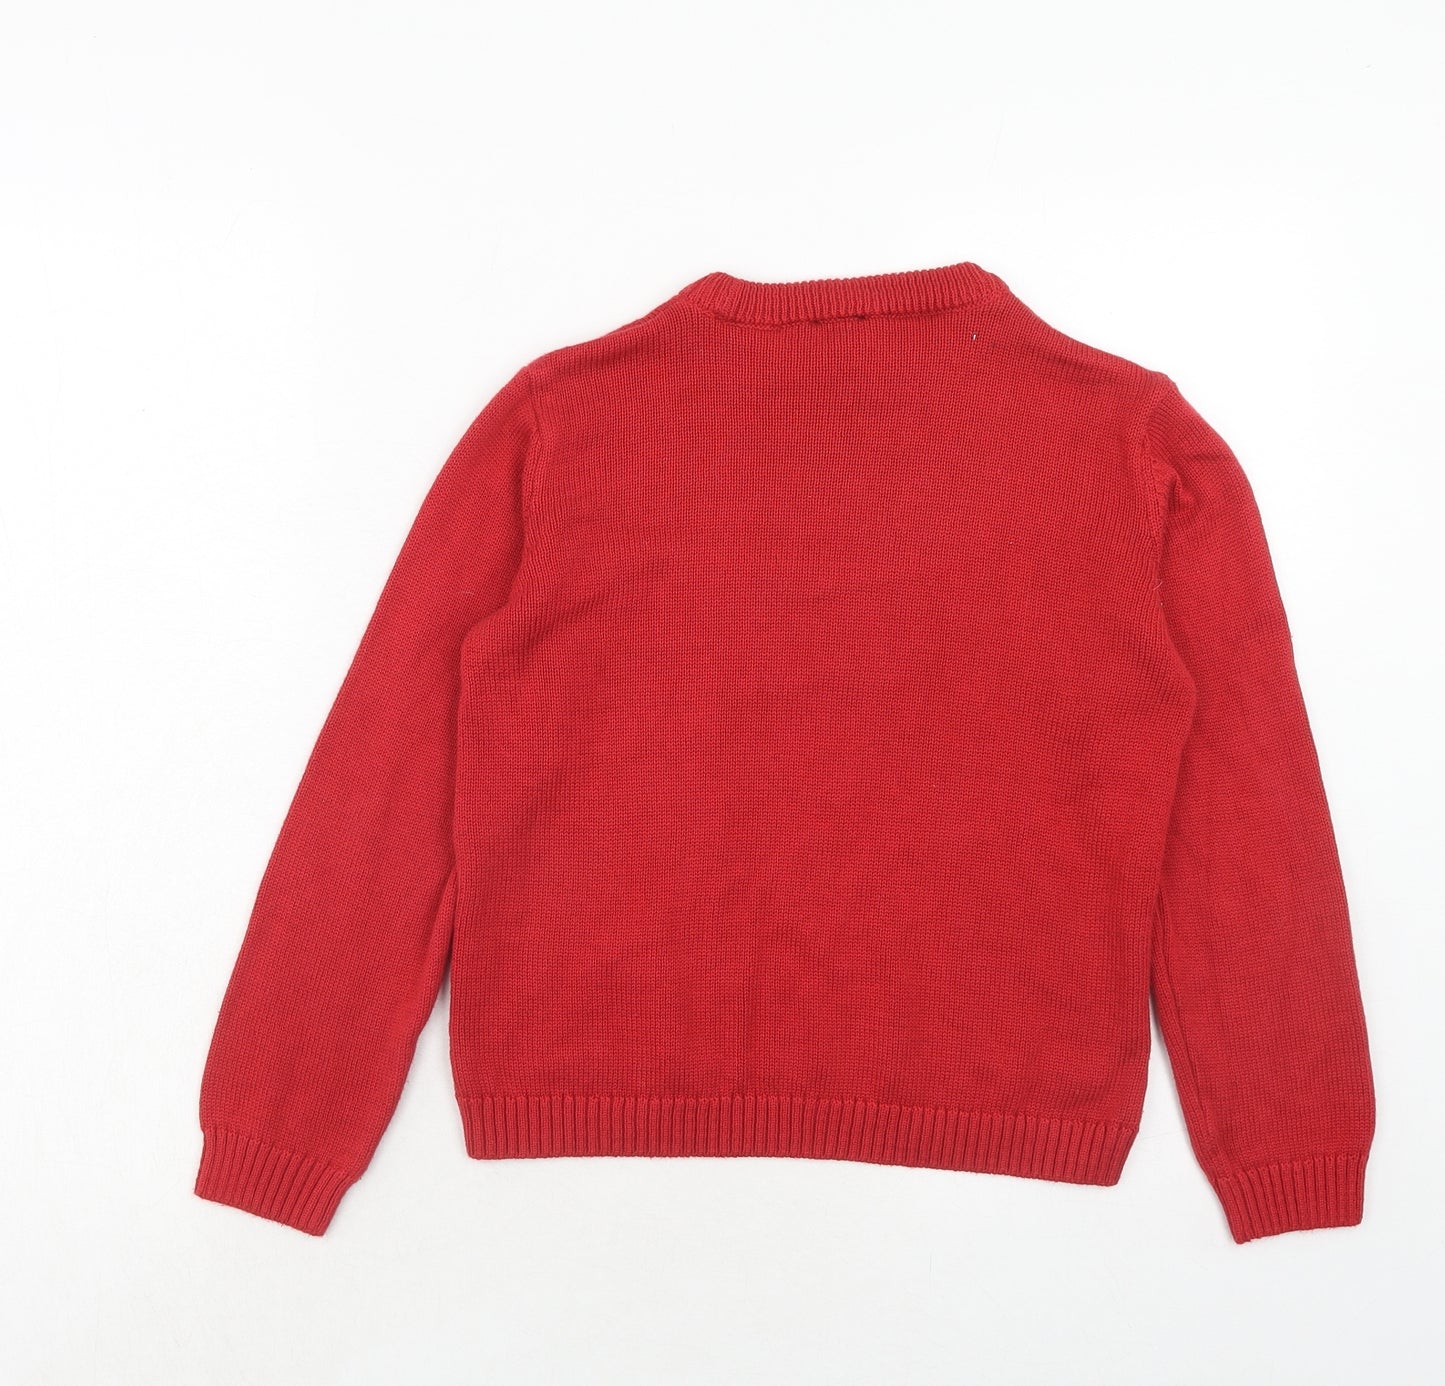 River Island Boys Red Round Neck Acrylic Pullover Jumper Size 9-10 Years Pullover - Xmas Loading